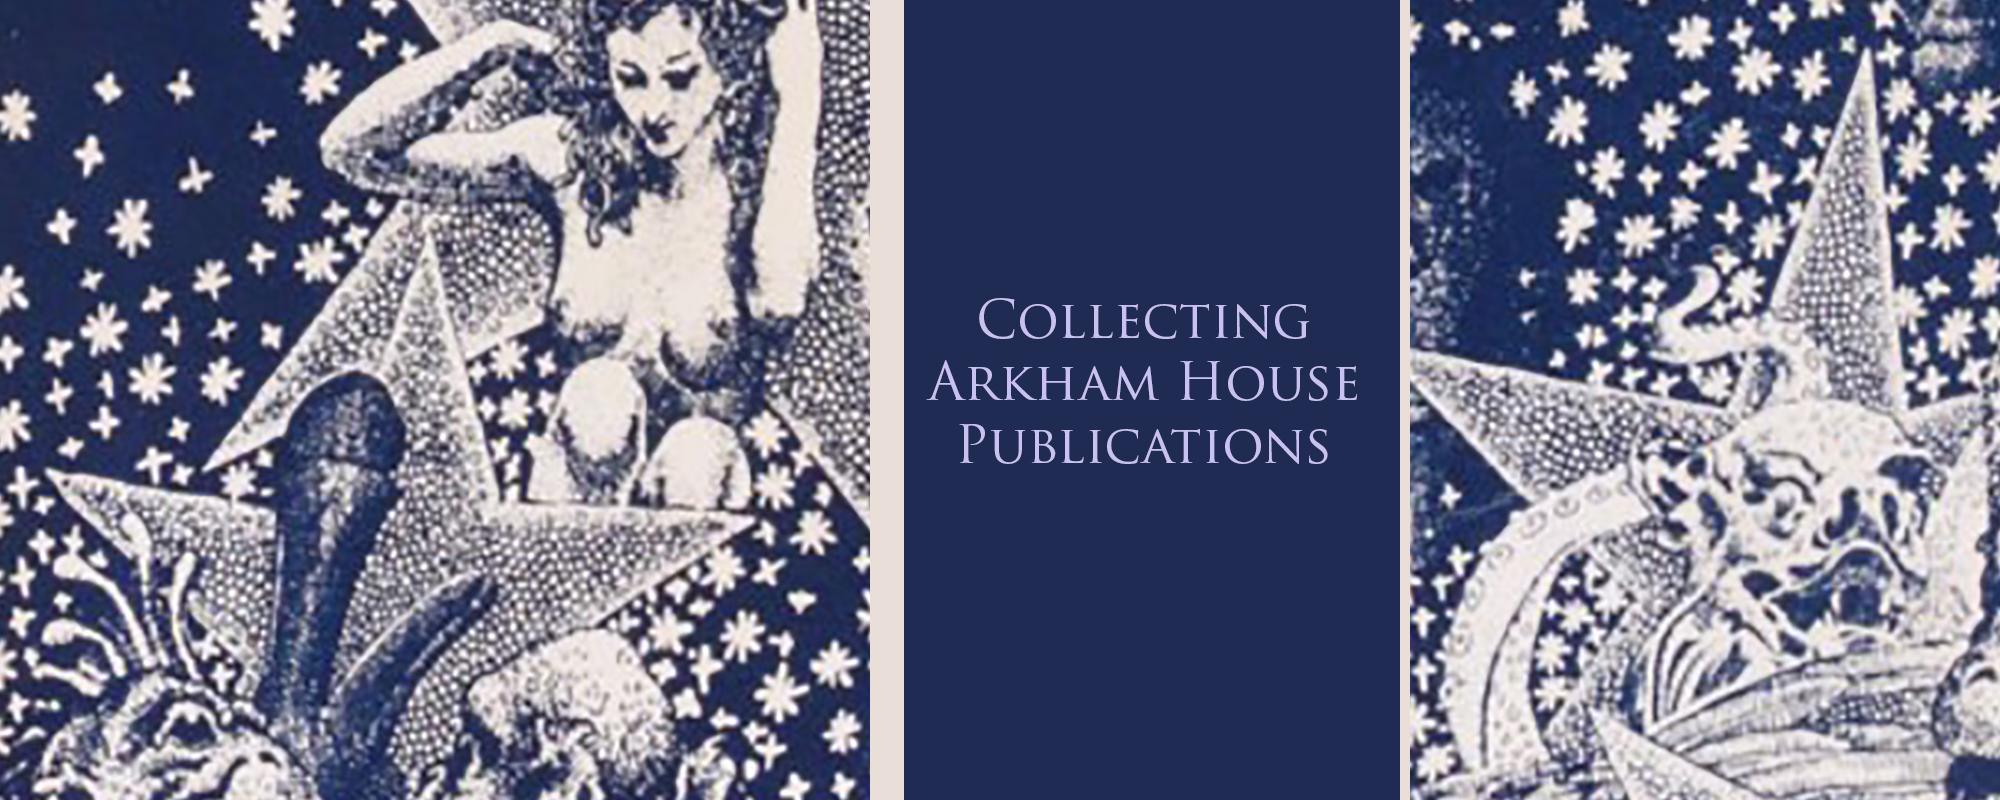 Collecting Arkham House